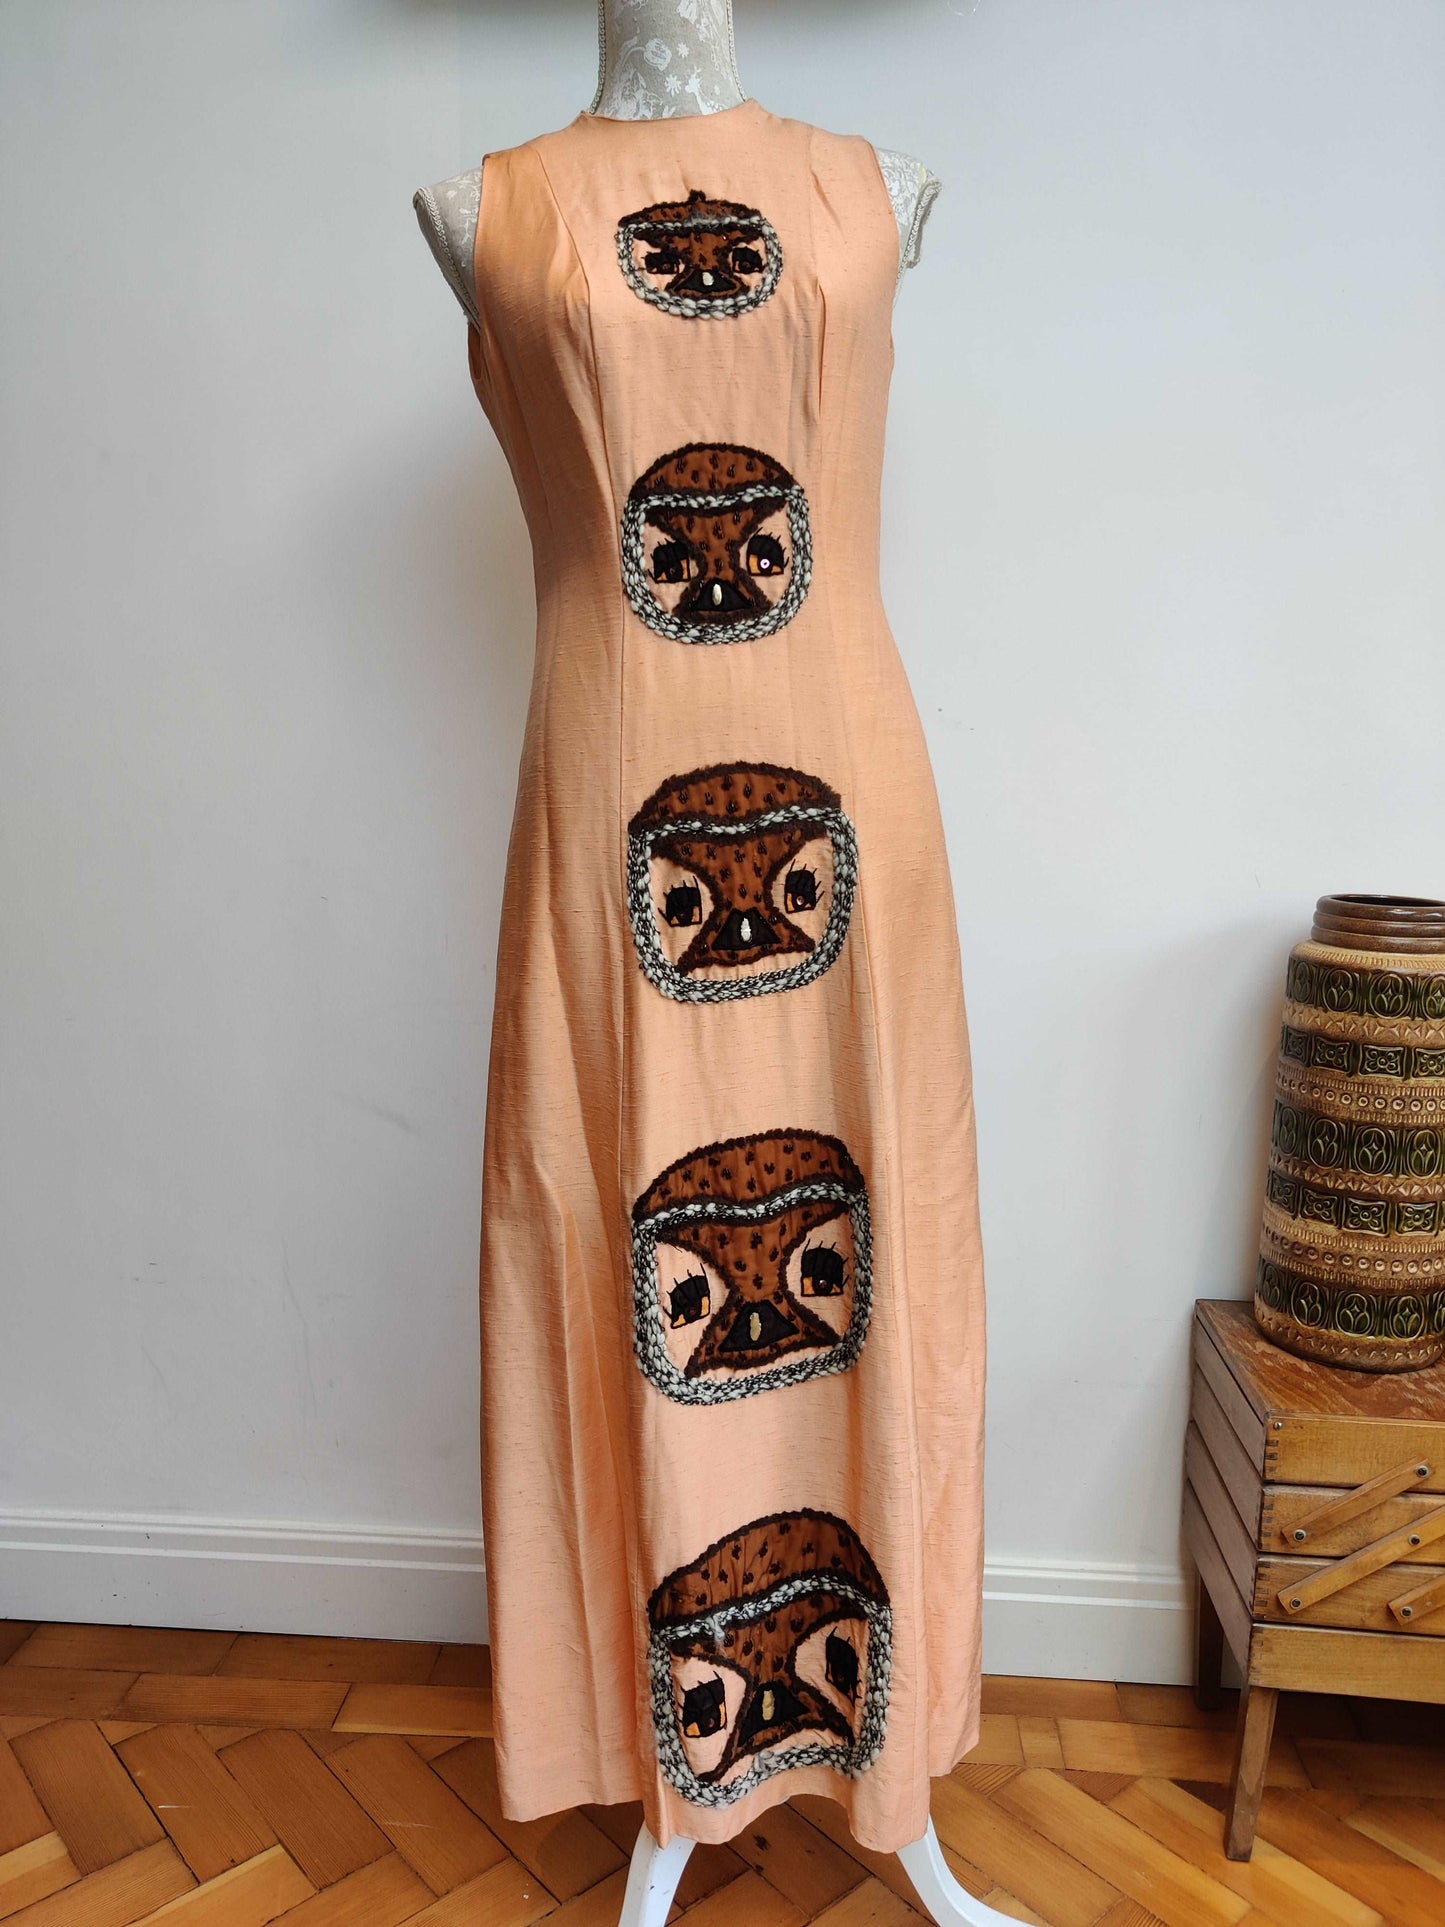 Beautiful 70s maxi dress with embellished design